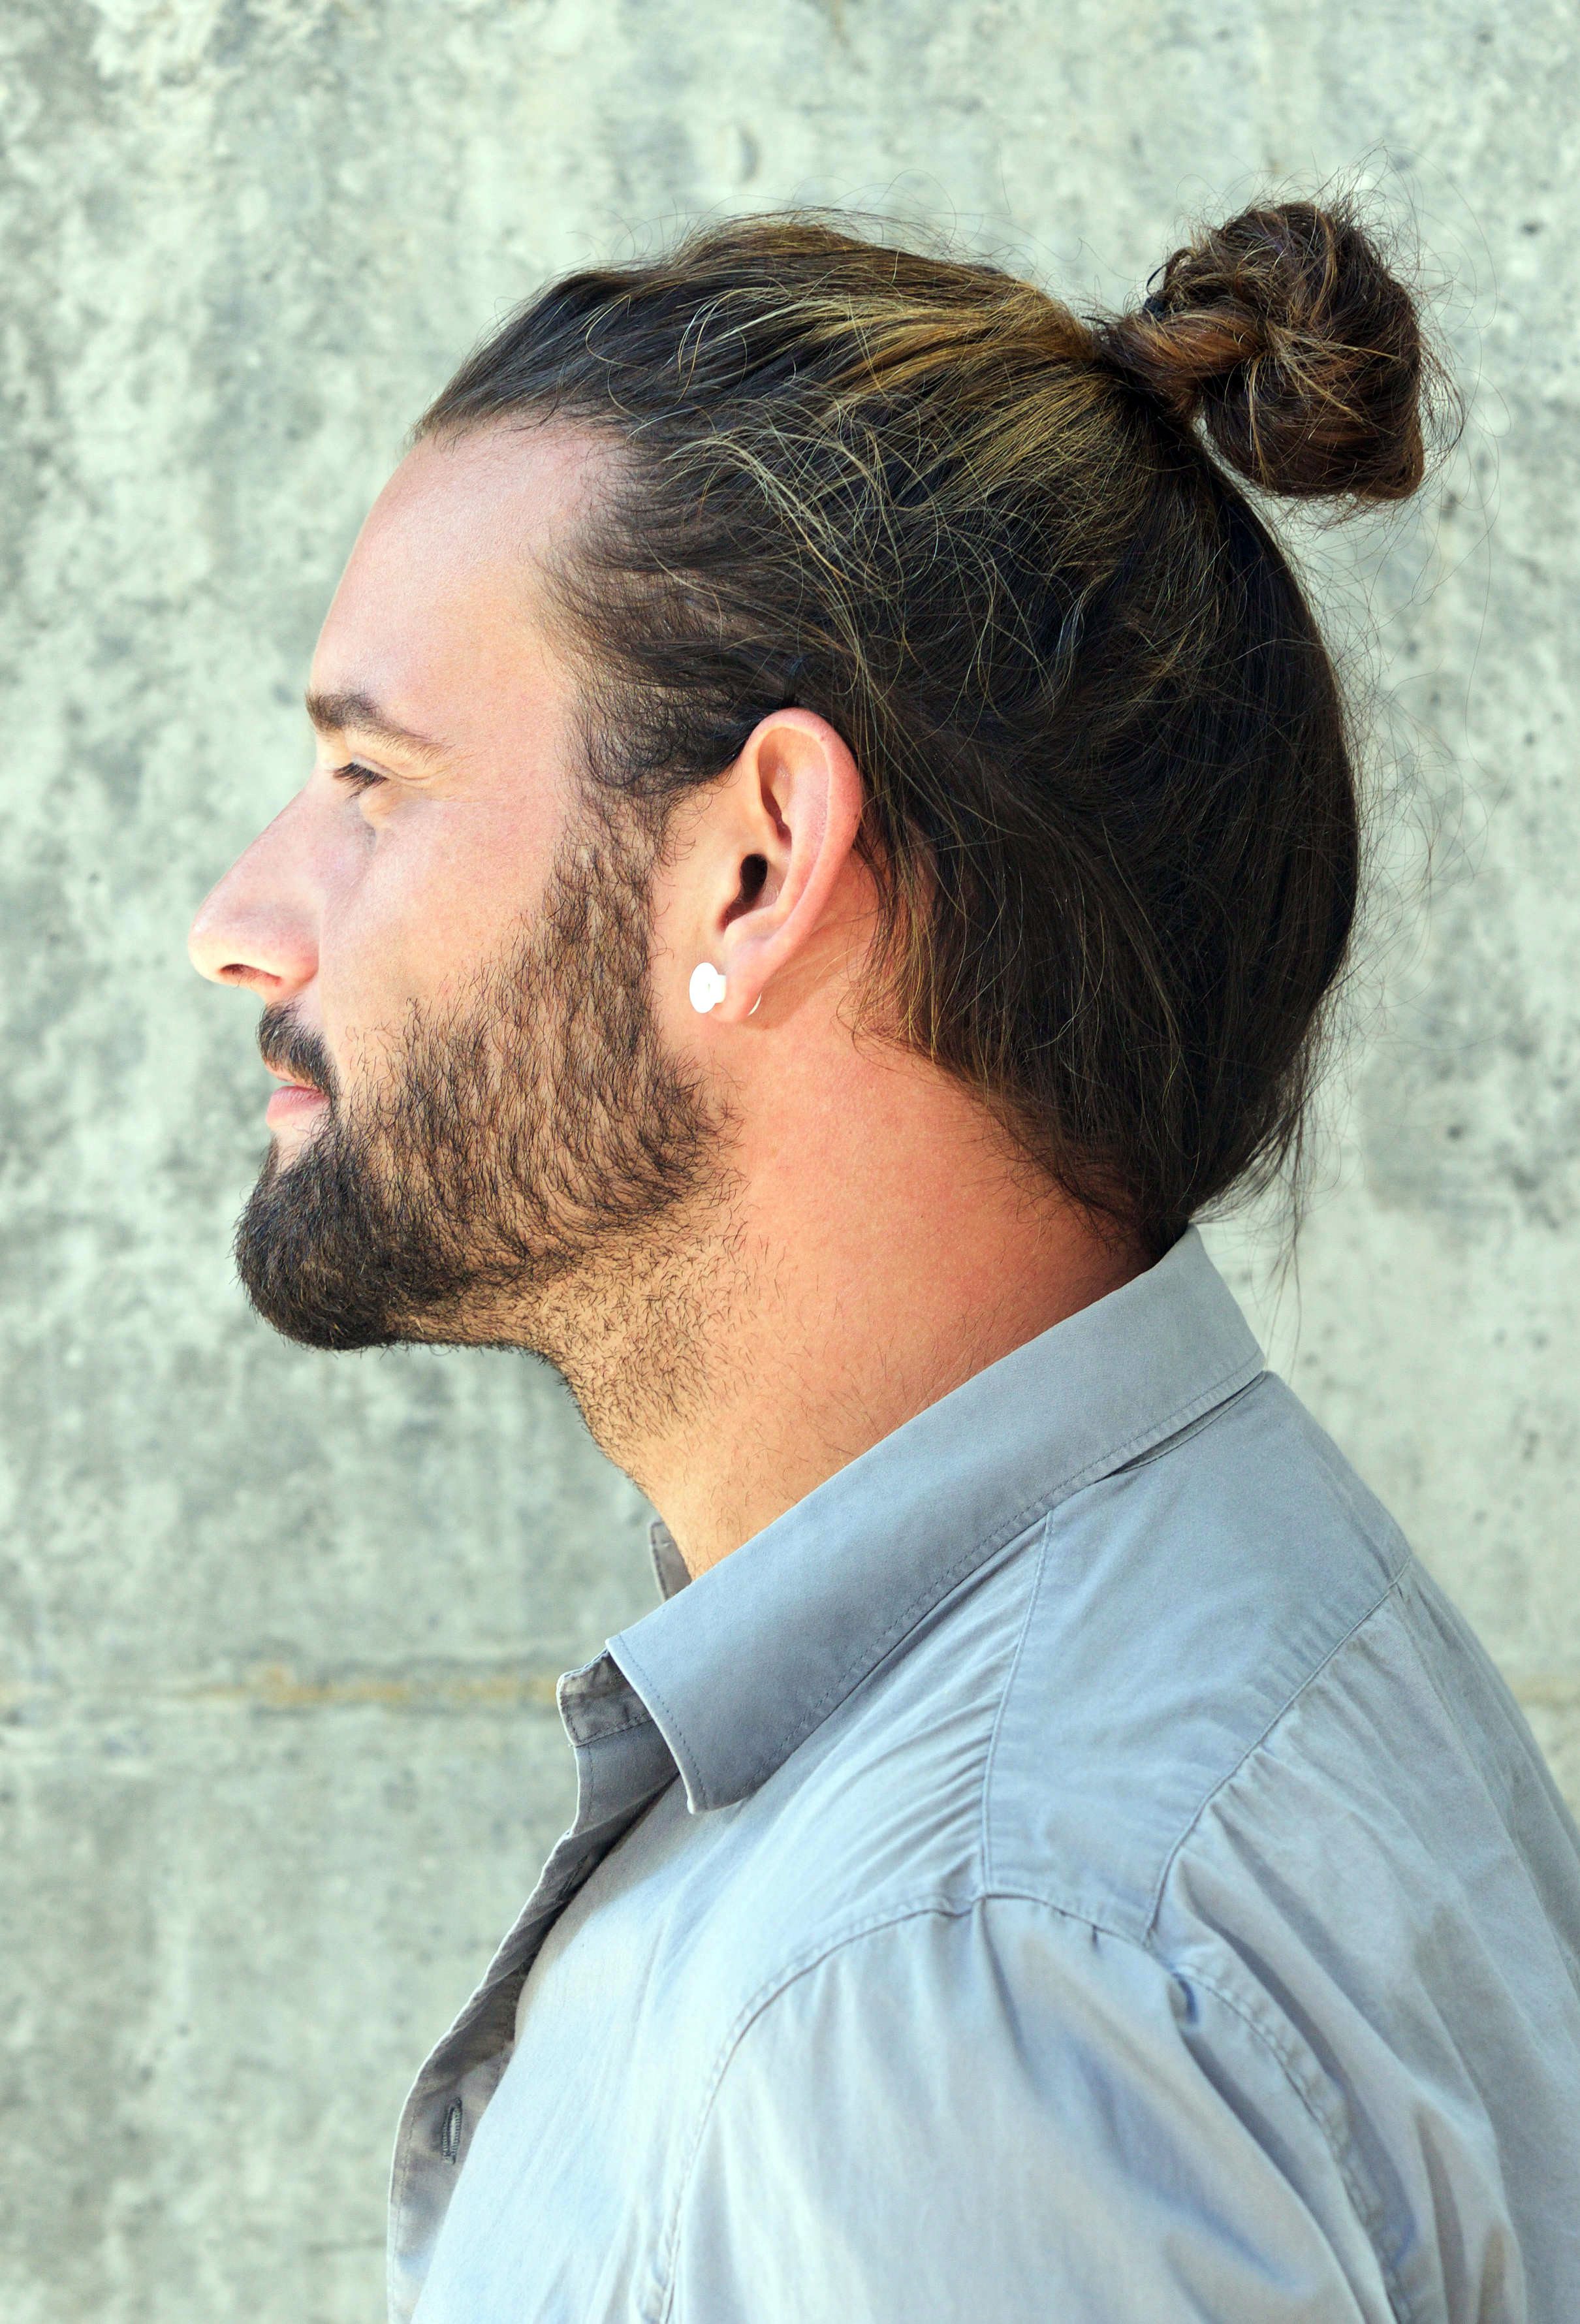 20 Types of Man Bun Hairstyles   Gallery + How To